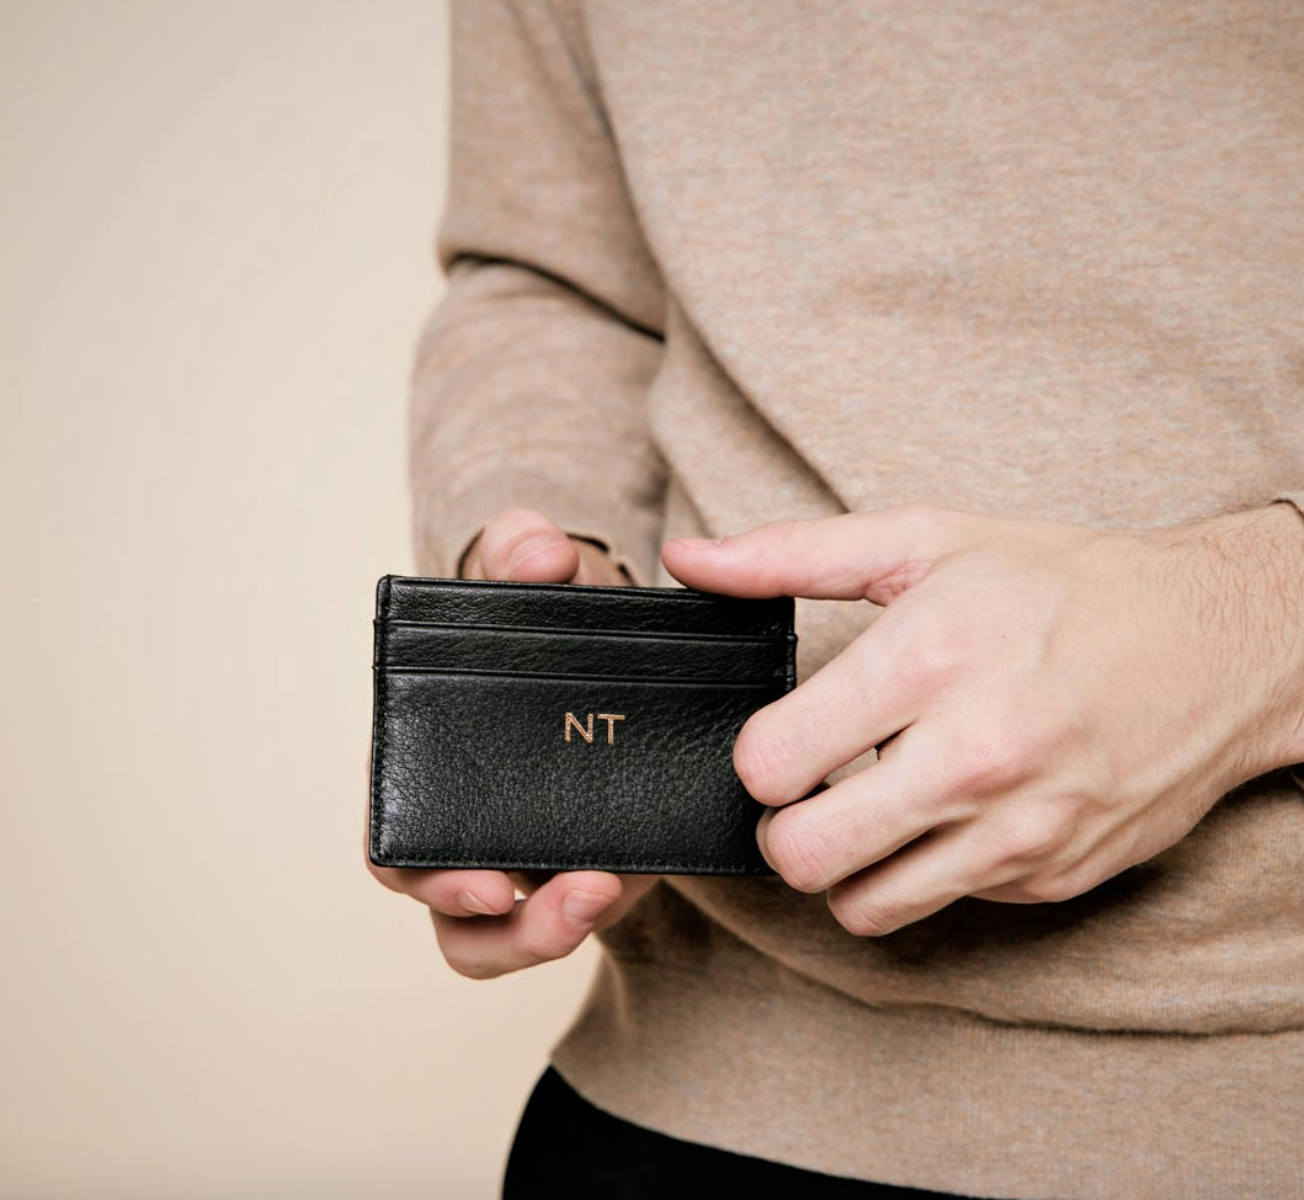 Ditch bulky wallets for these 10 stylish and functional card holders